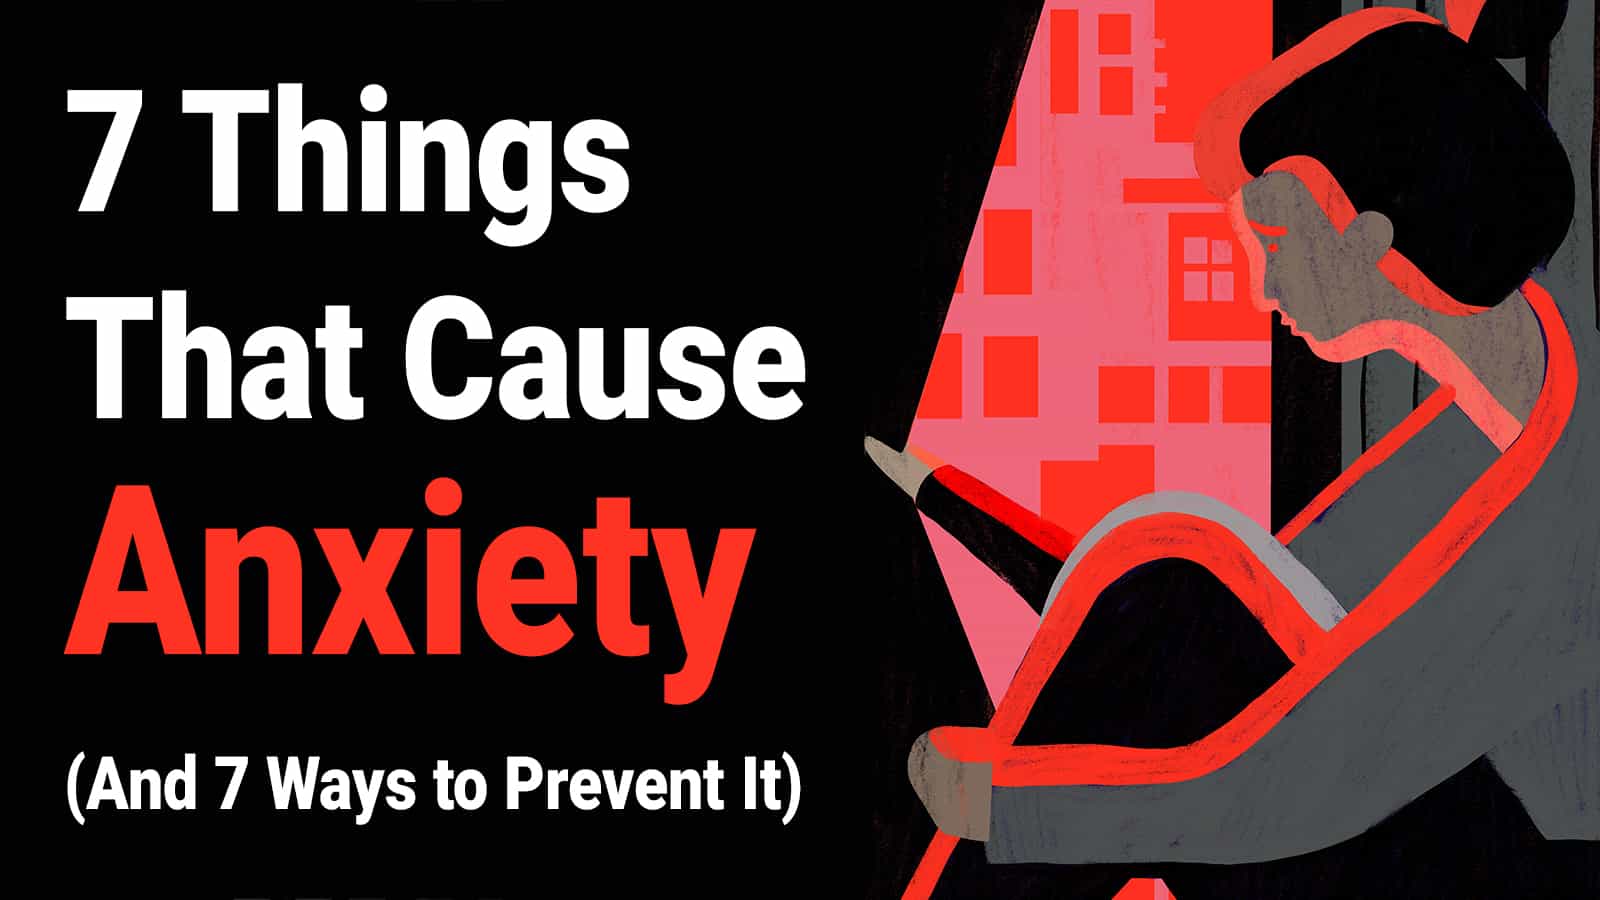 7 Things That Cause Anxiety (And 7 Ways to Prevent It)